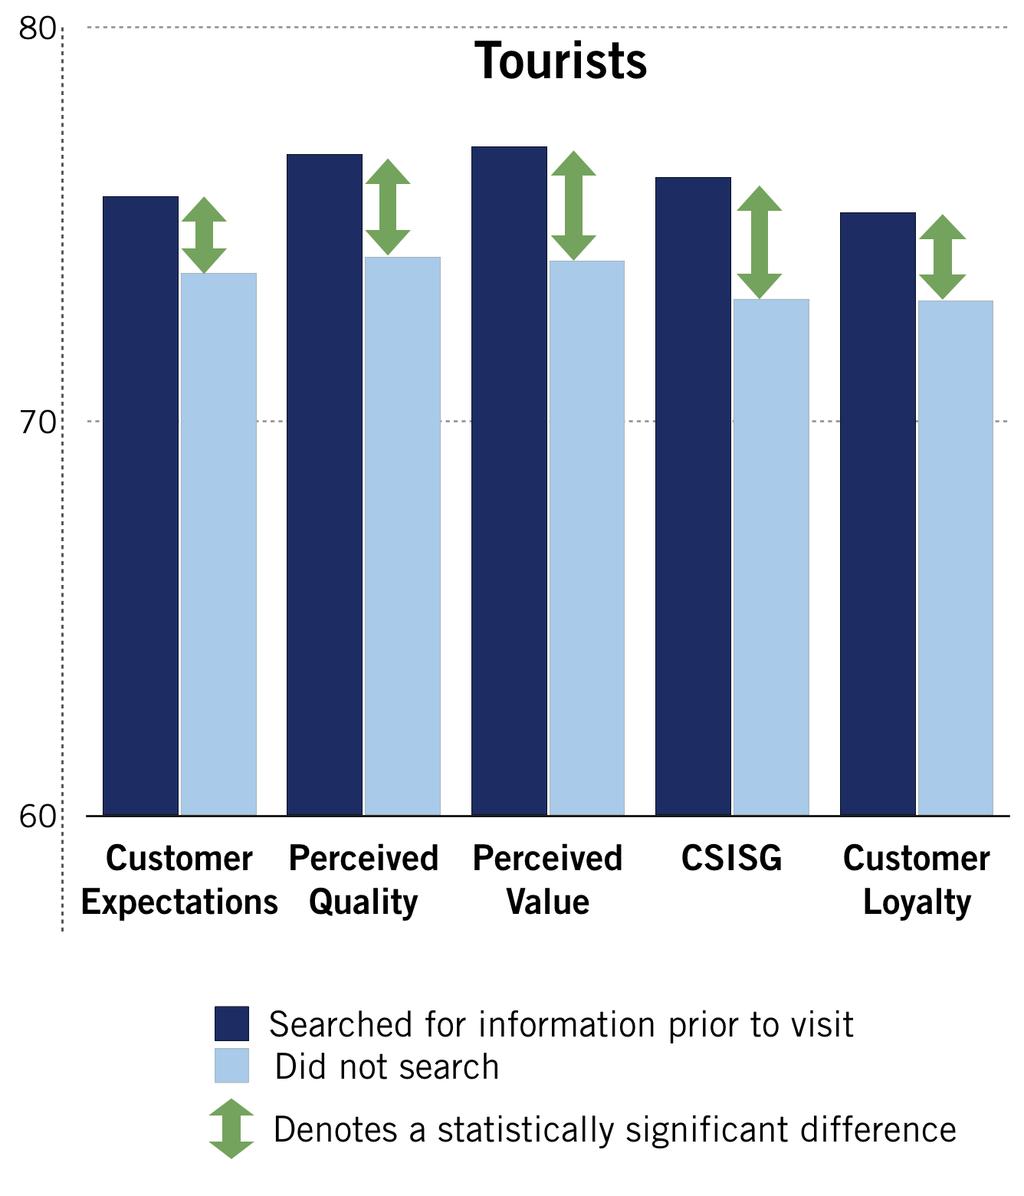 THIRD QUARTER KEY FINDINGS Satisfaction with Attractions Significantly Higher When Visitors Search for Information Prior to Visit Visitors that searched for information about the attraction prior to